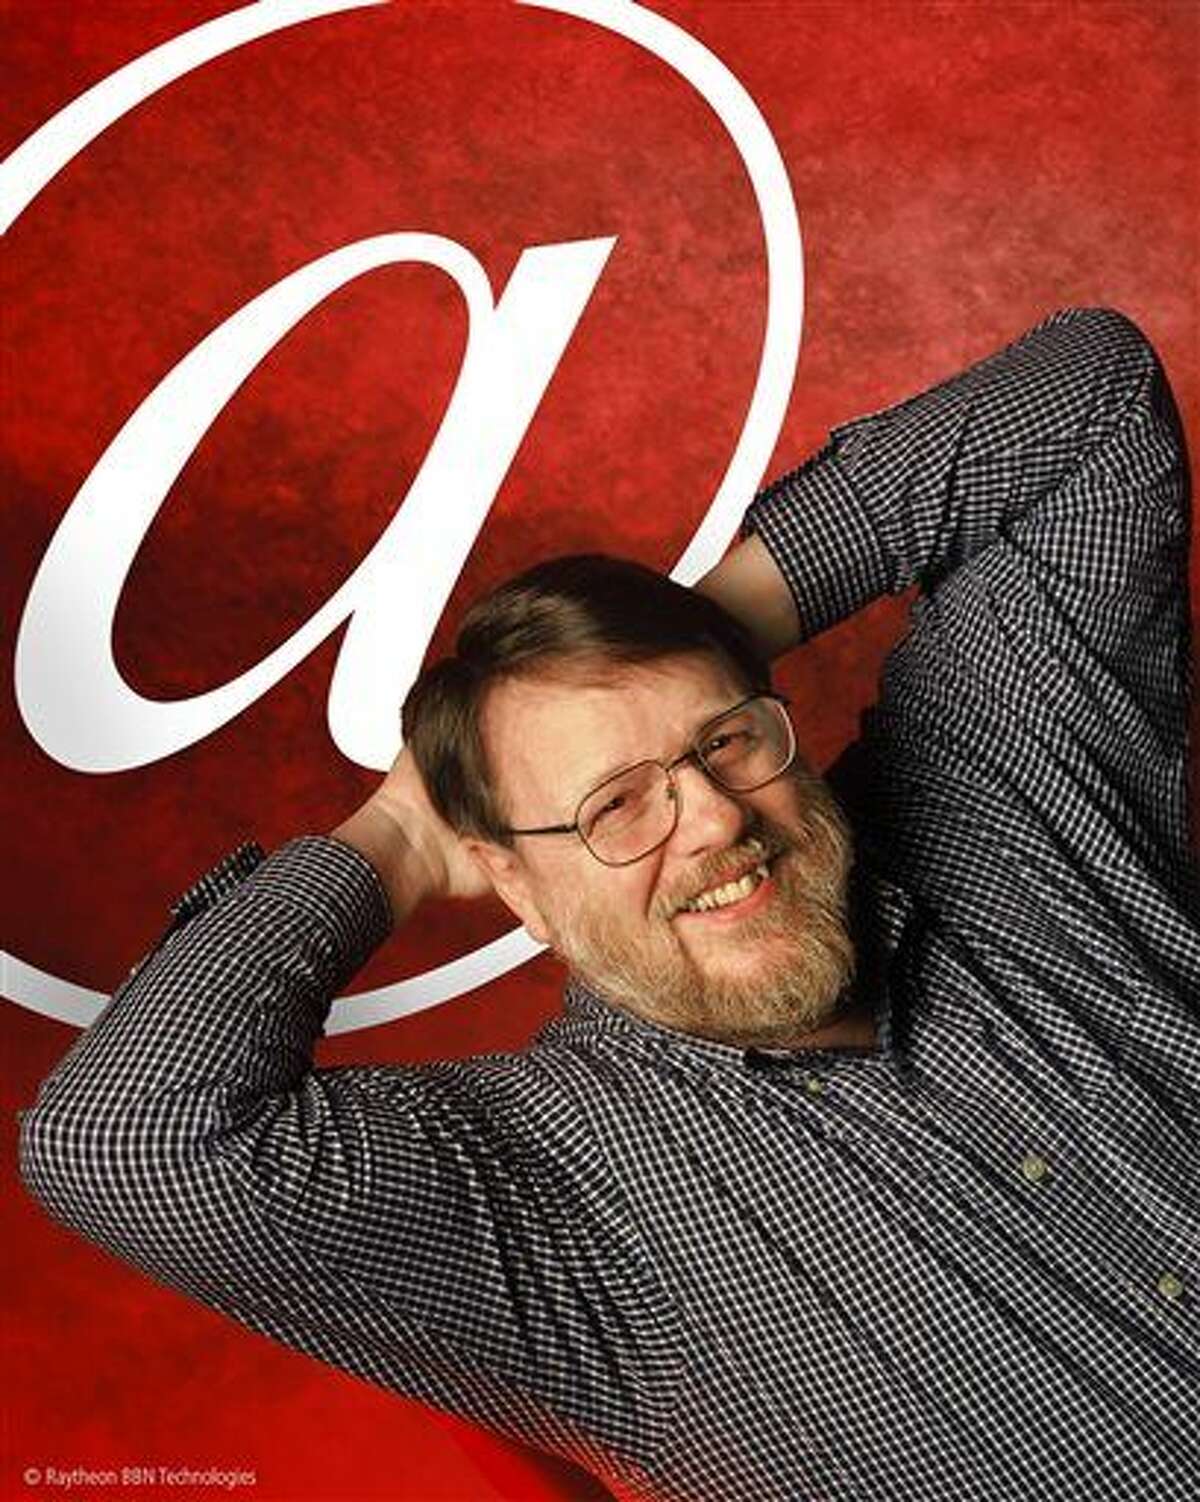 An undated photo provided by Raytheon BBN Technologies shows Raymond Tomlinson. Tomlinson, the inventor of modern email and selector of the "@" symbol, has died.